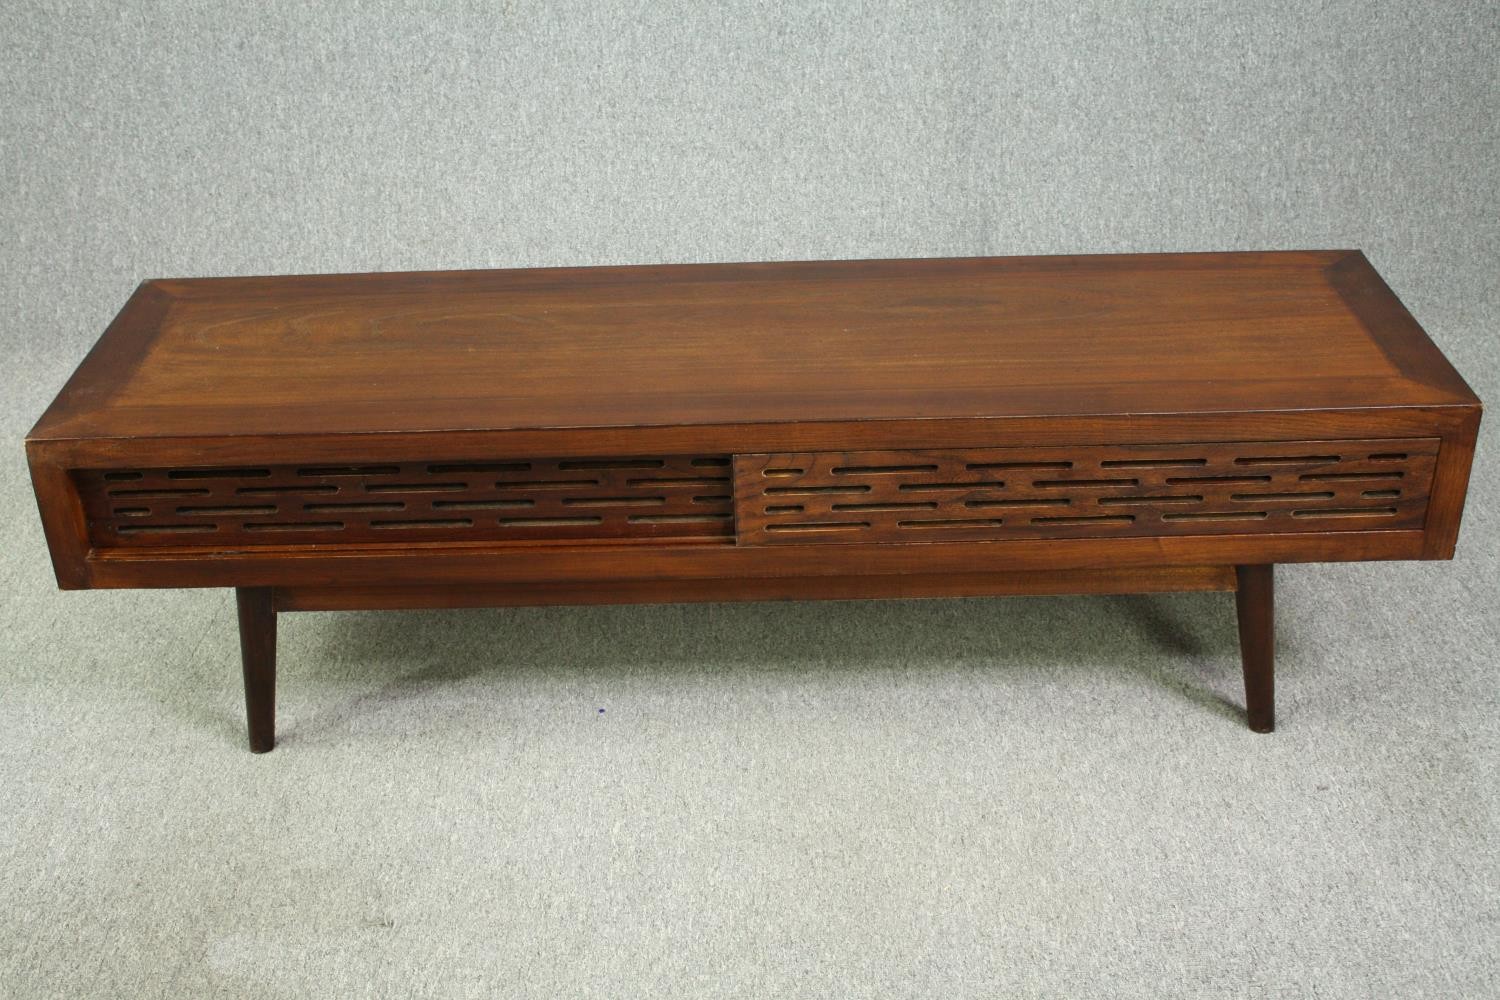 A large retro styled hardwood low side table or coffee table. H.45 W.160 D.45cm.